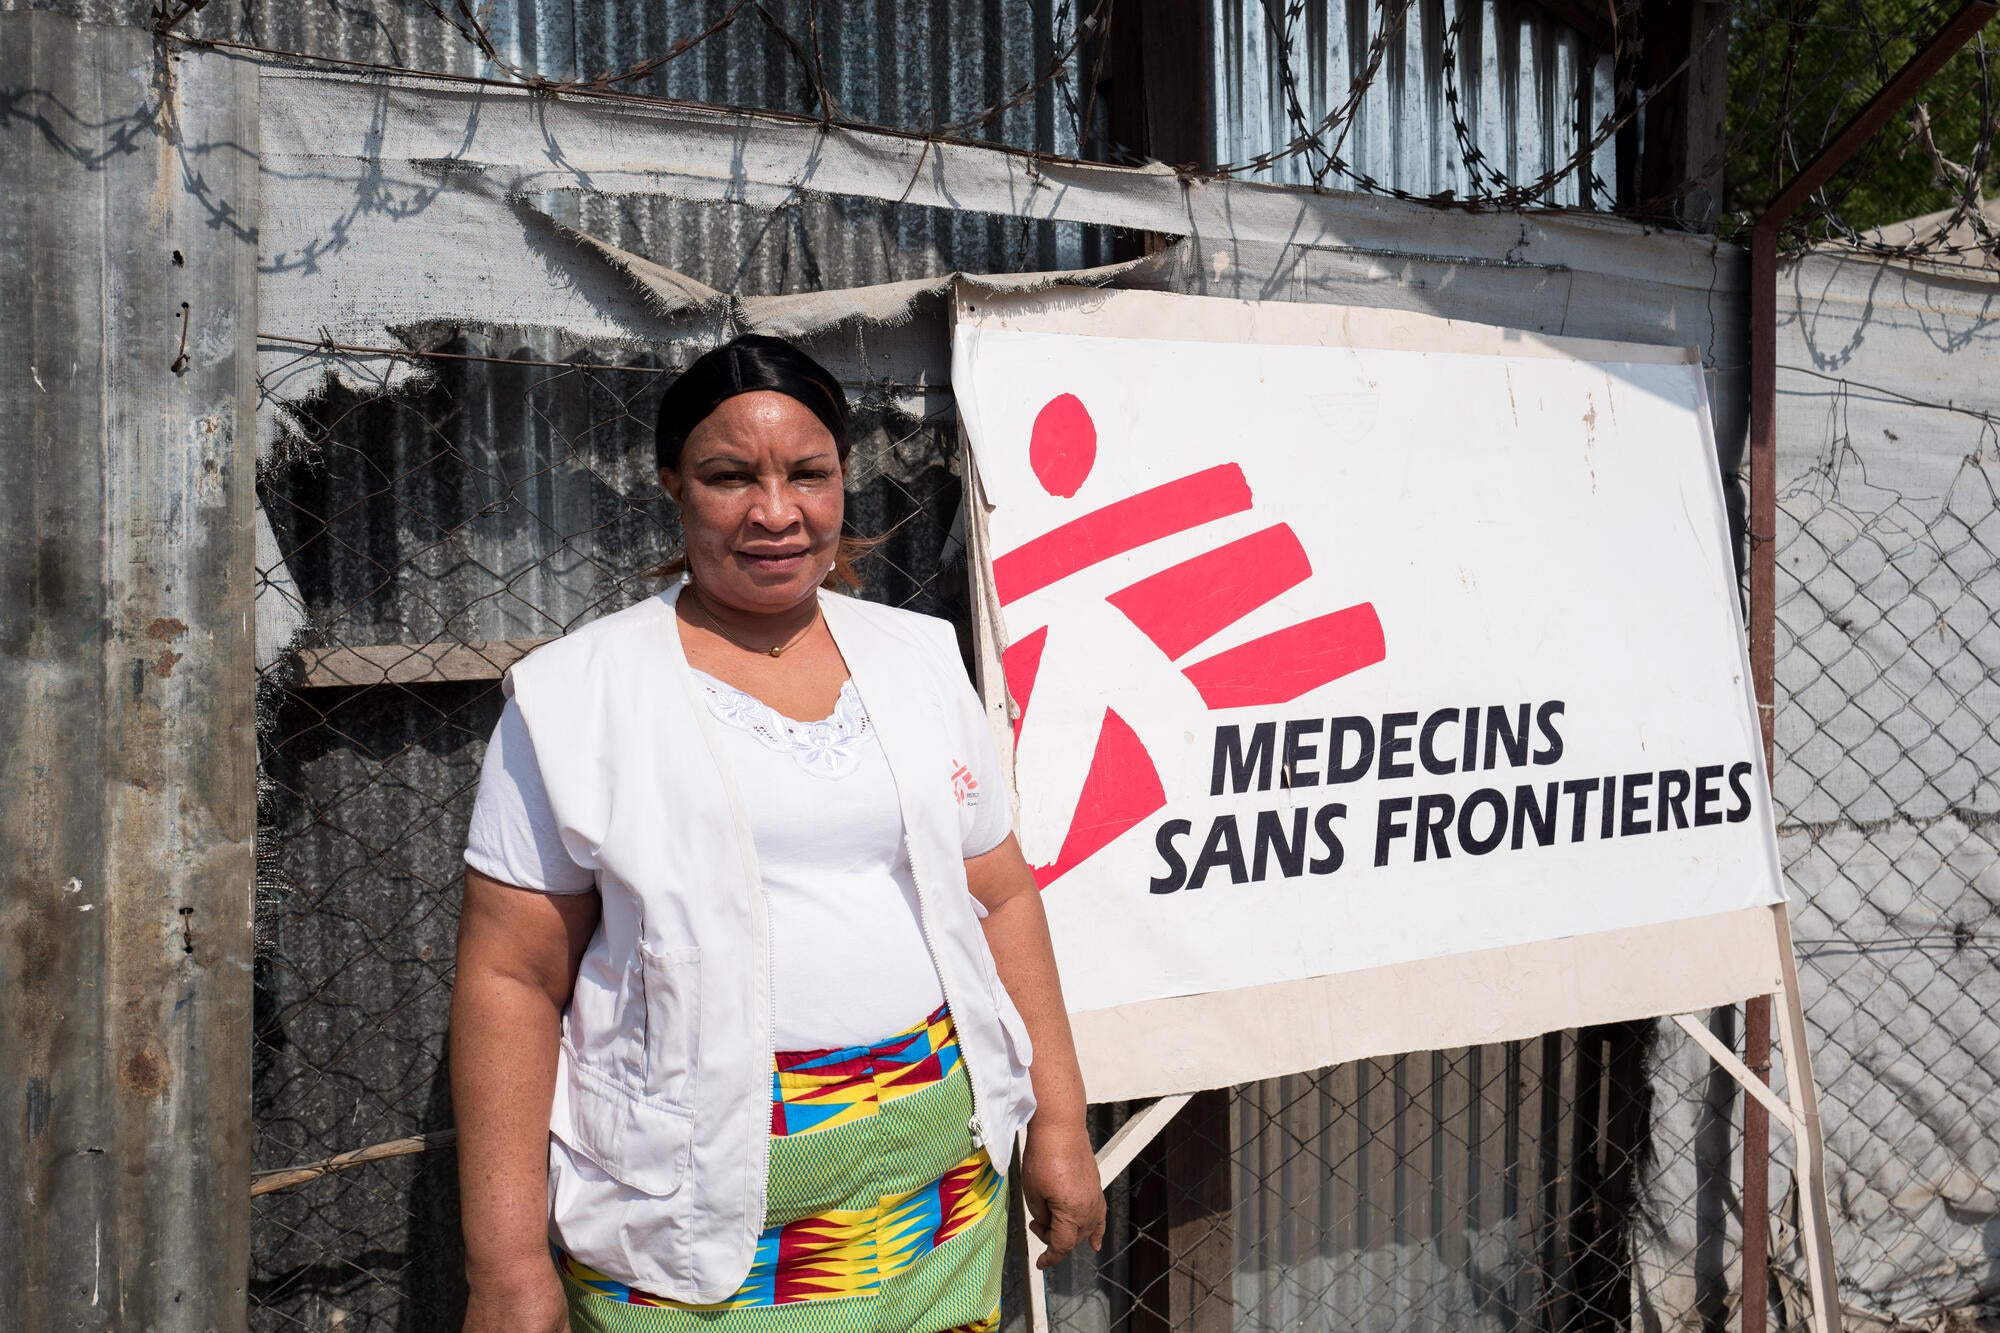 Fatmata Jebbeh Sumaila worked with MSF as a midwife and midwife supervisor in her home country of Sierra Leone for 17 years